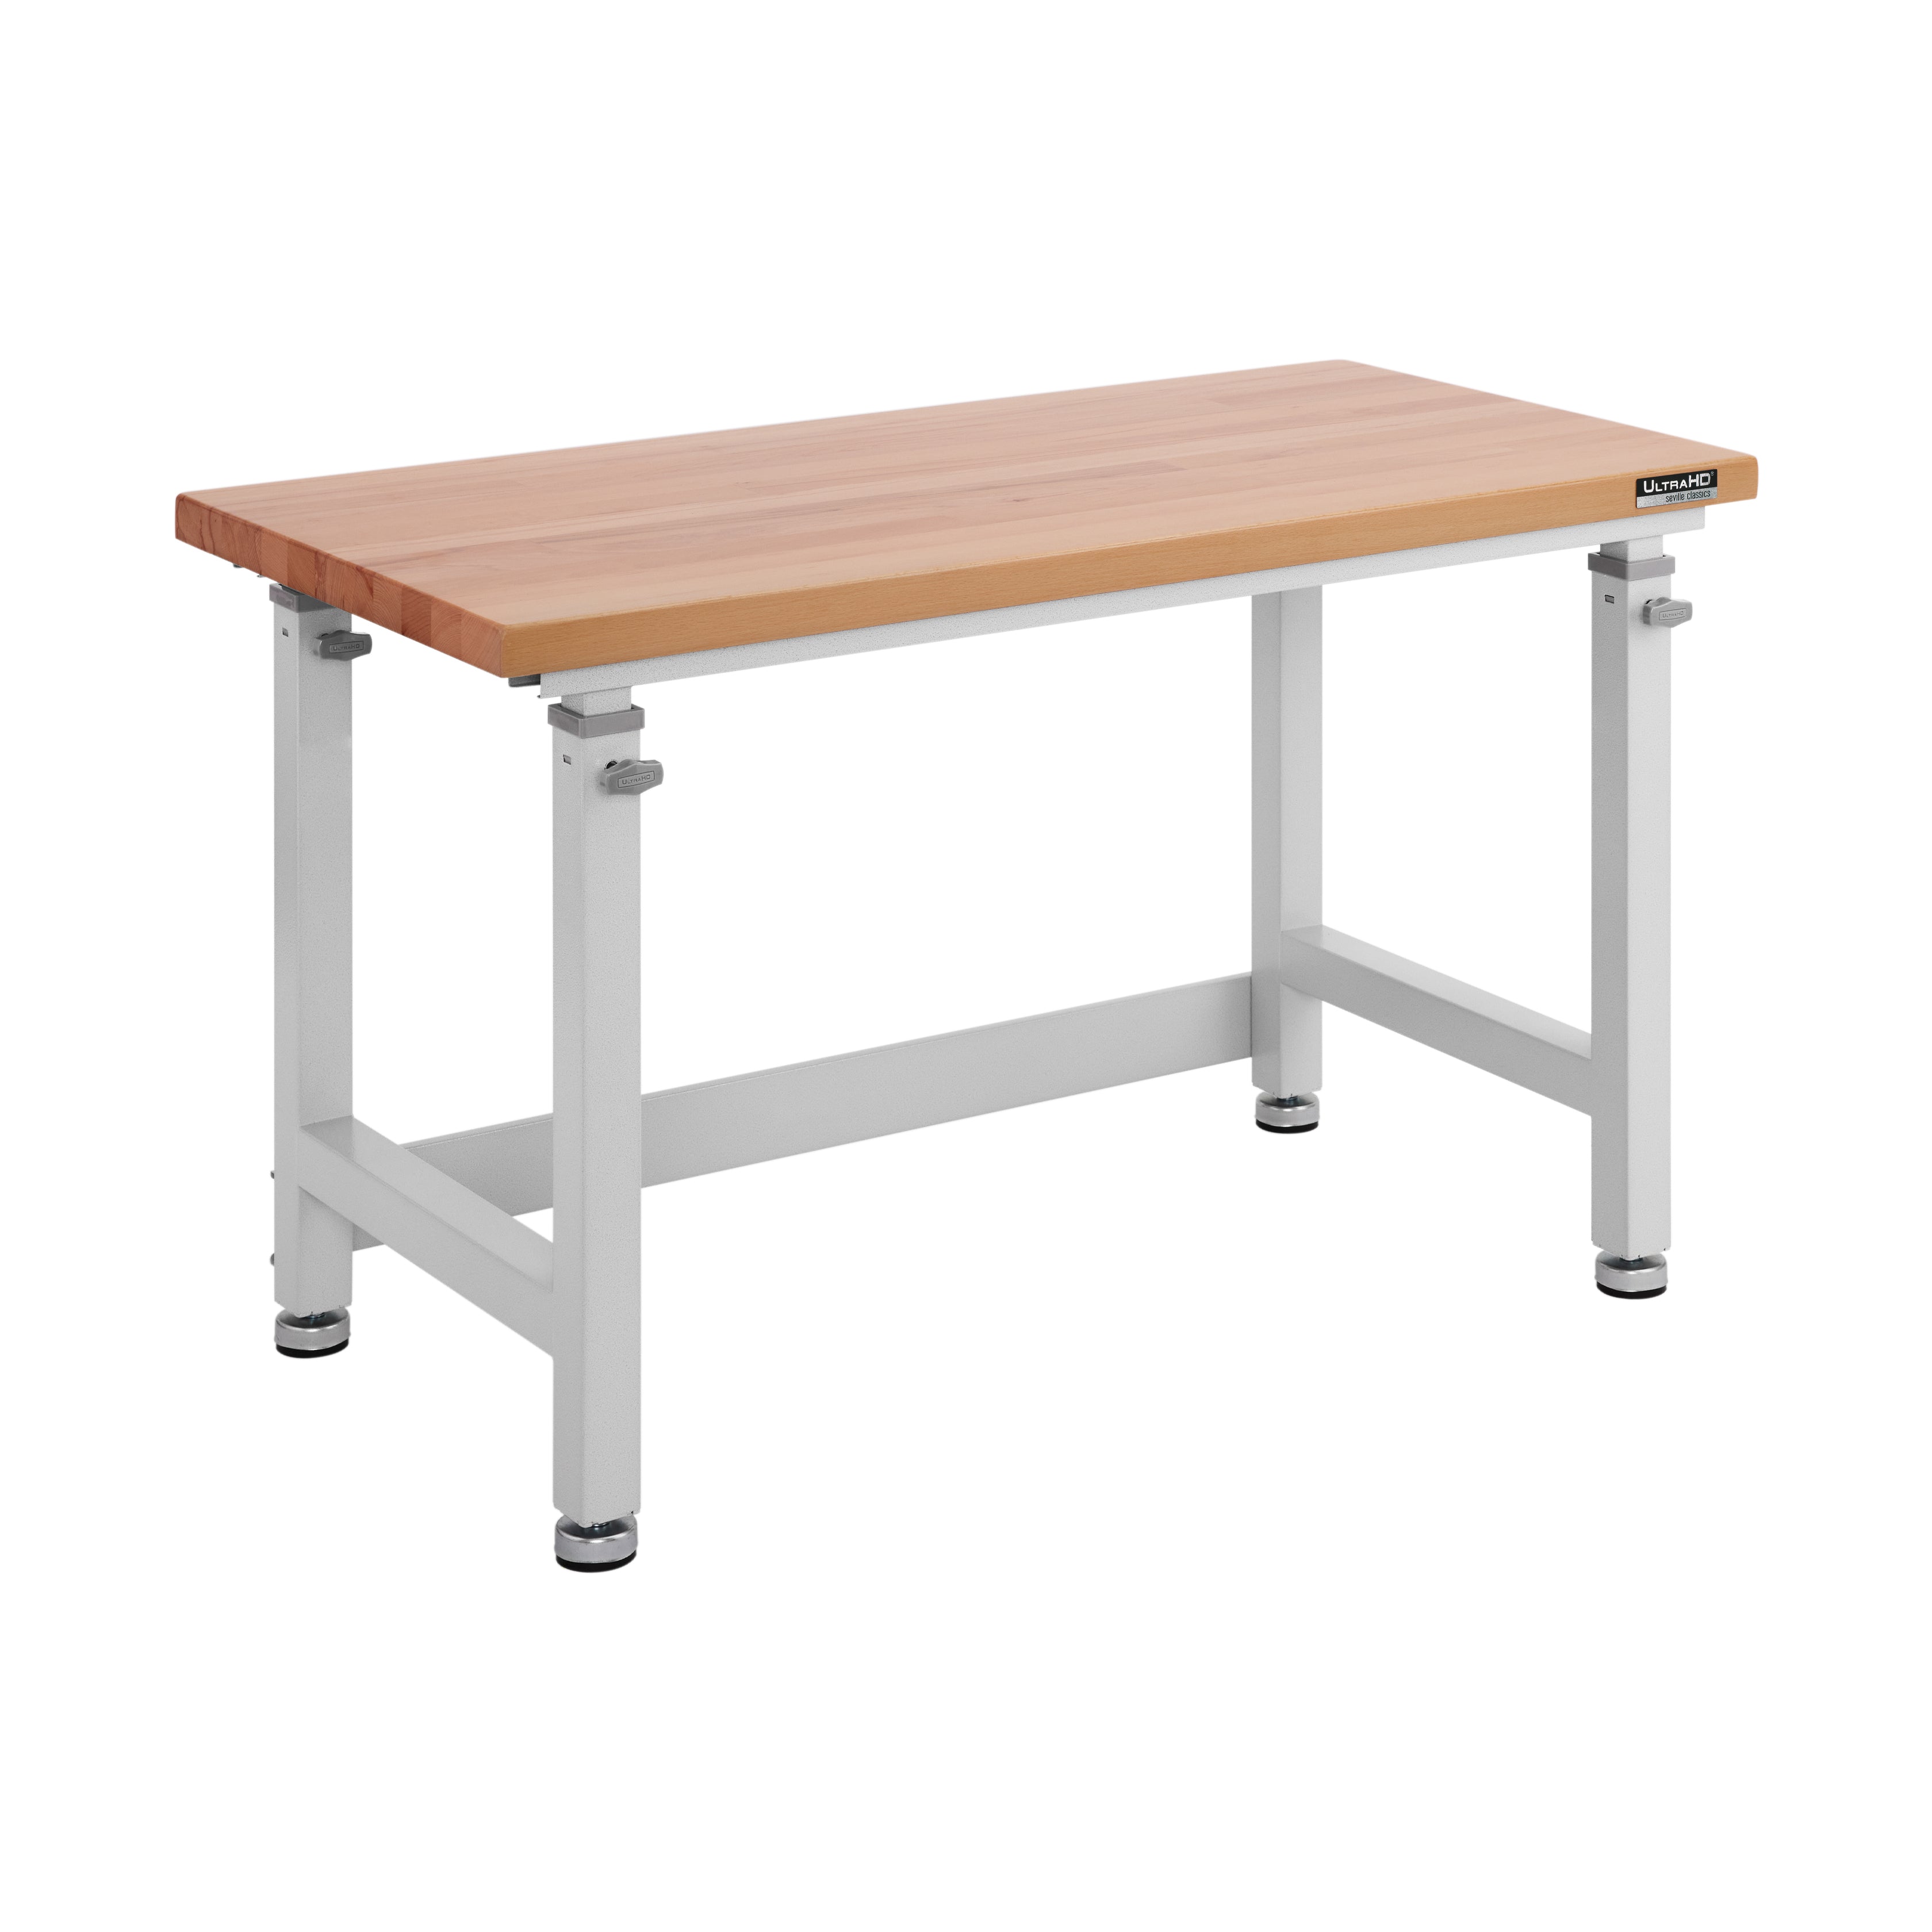 Seville Classics UltraHD Workbench With Peg Board and Castors